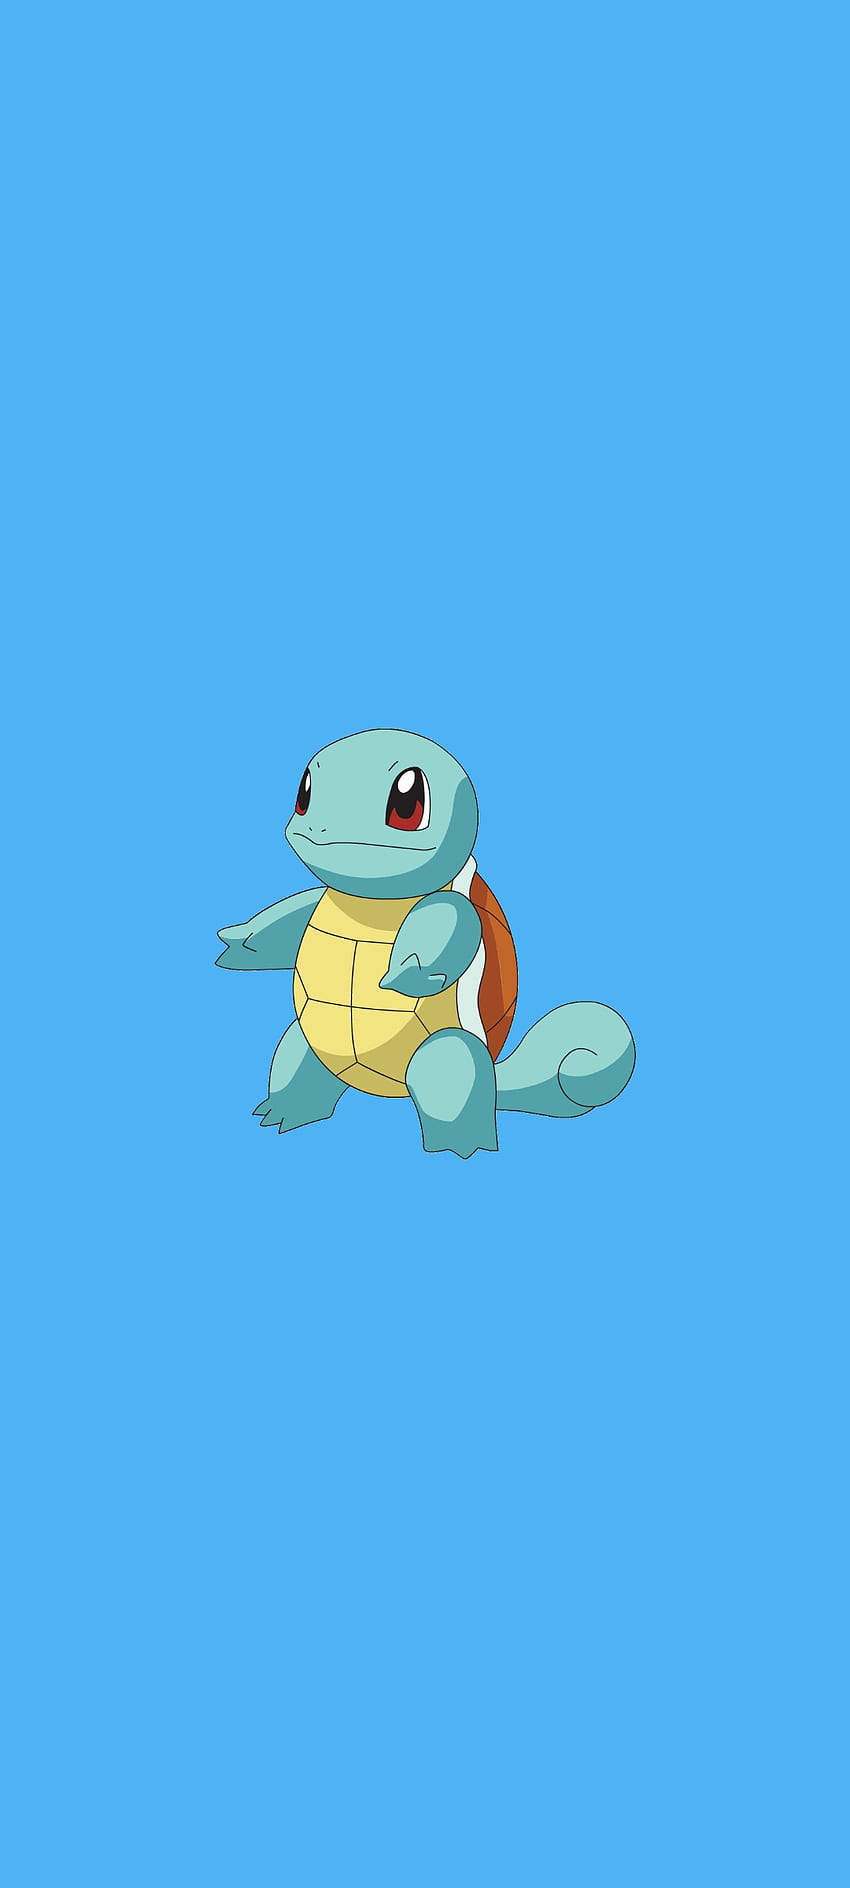 Pokémon: 16 Things You Didn't Know About Squirtle